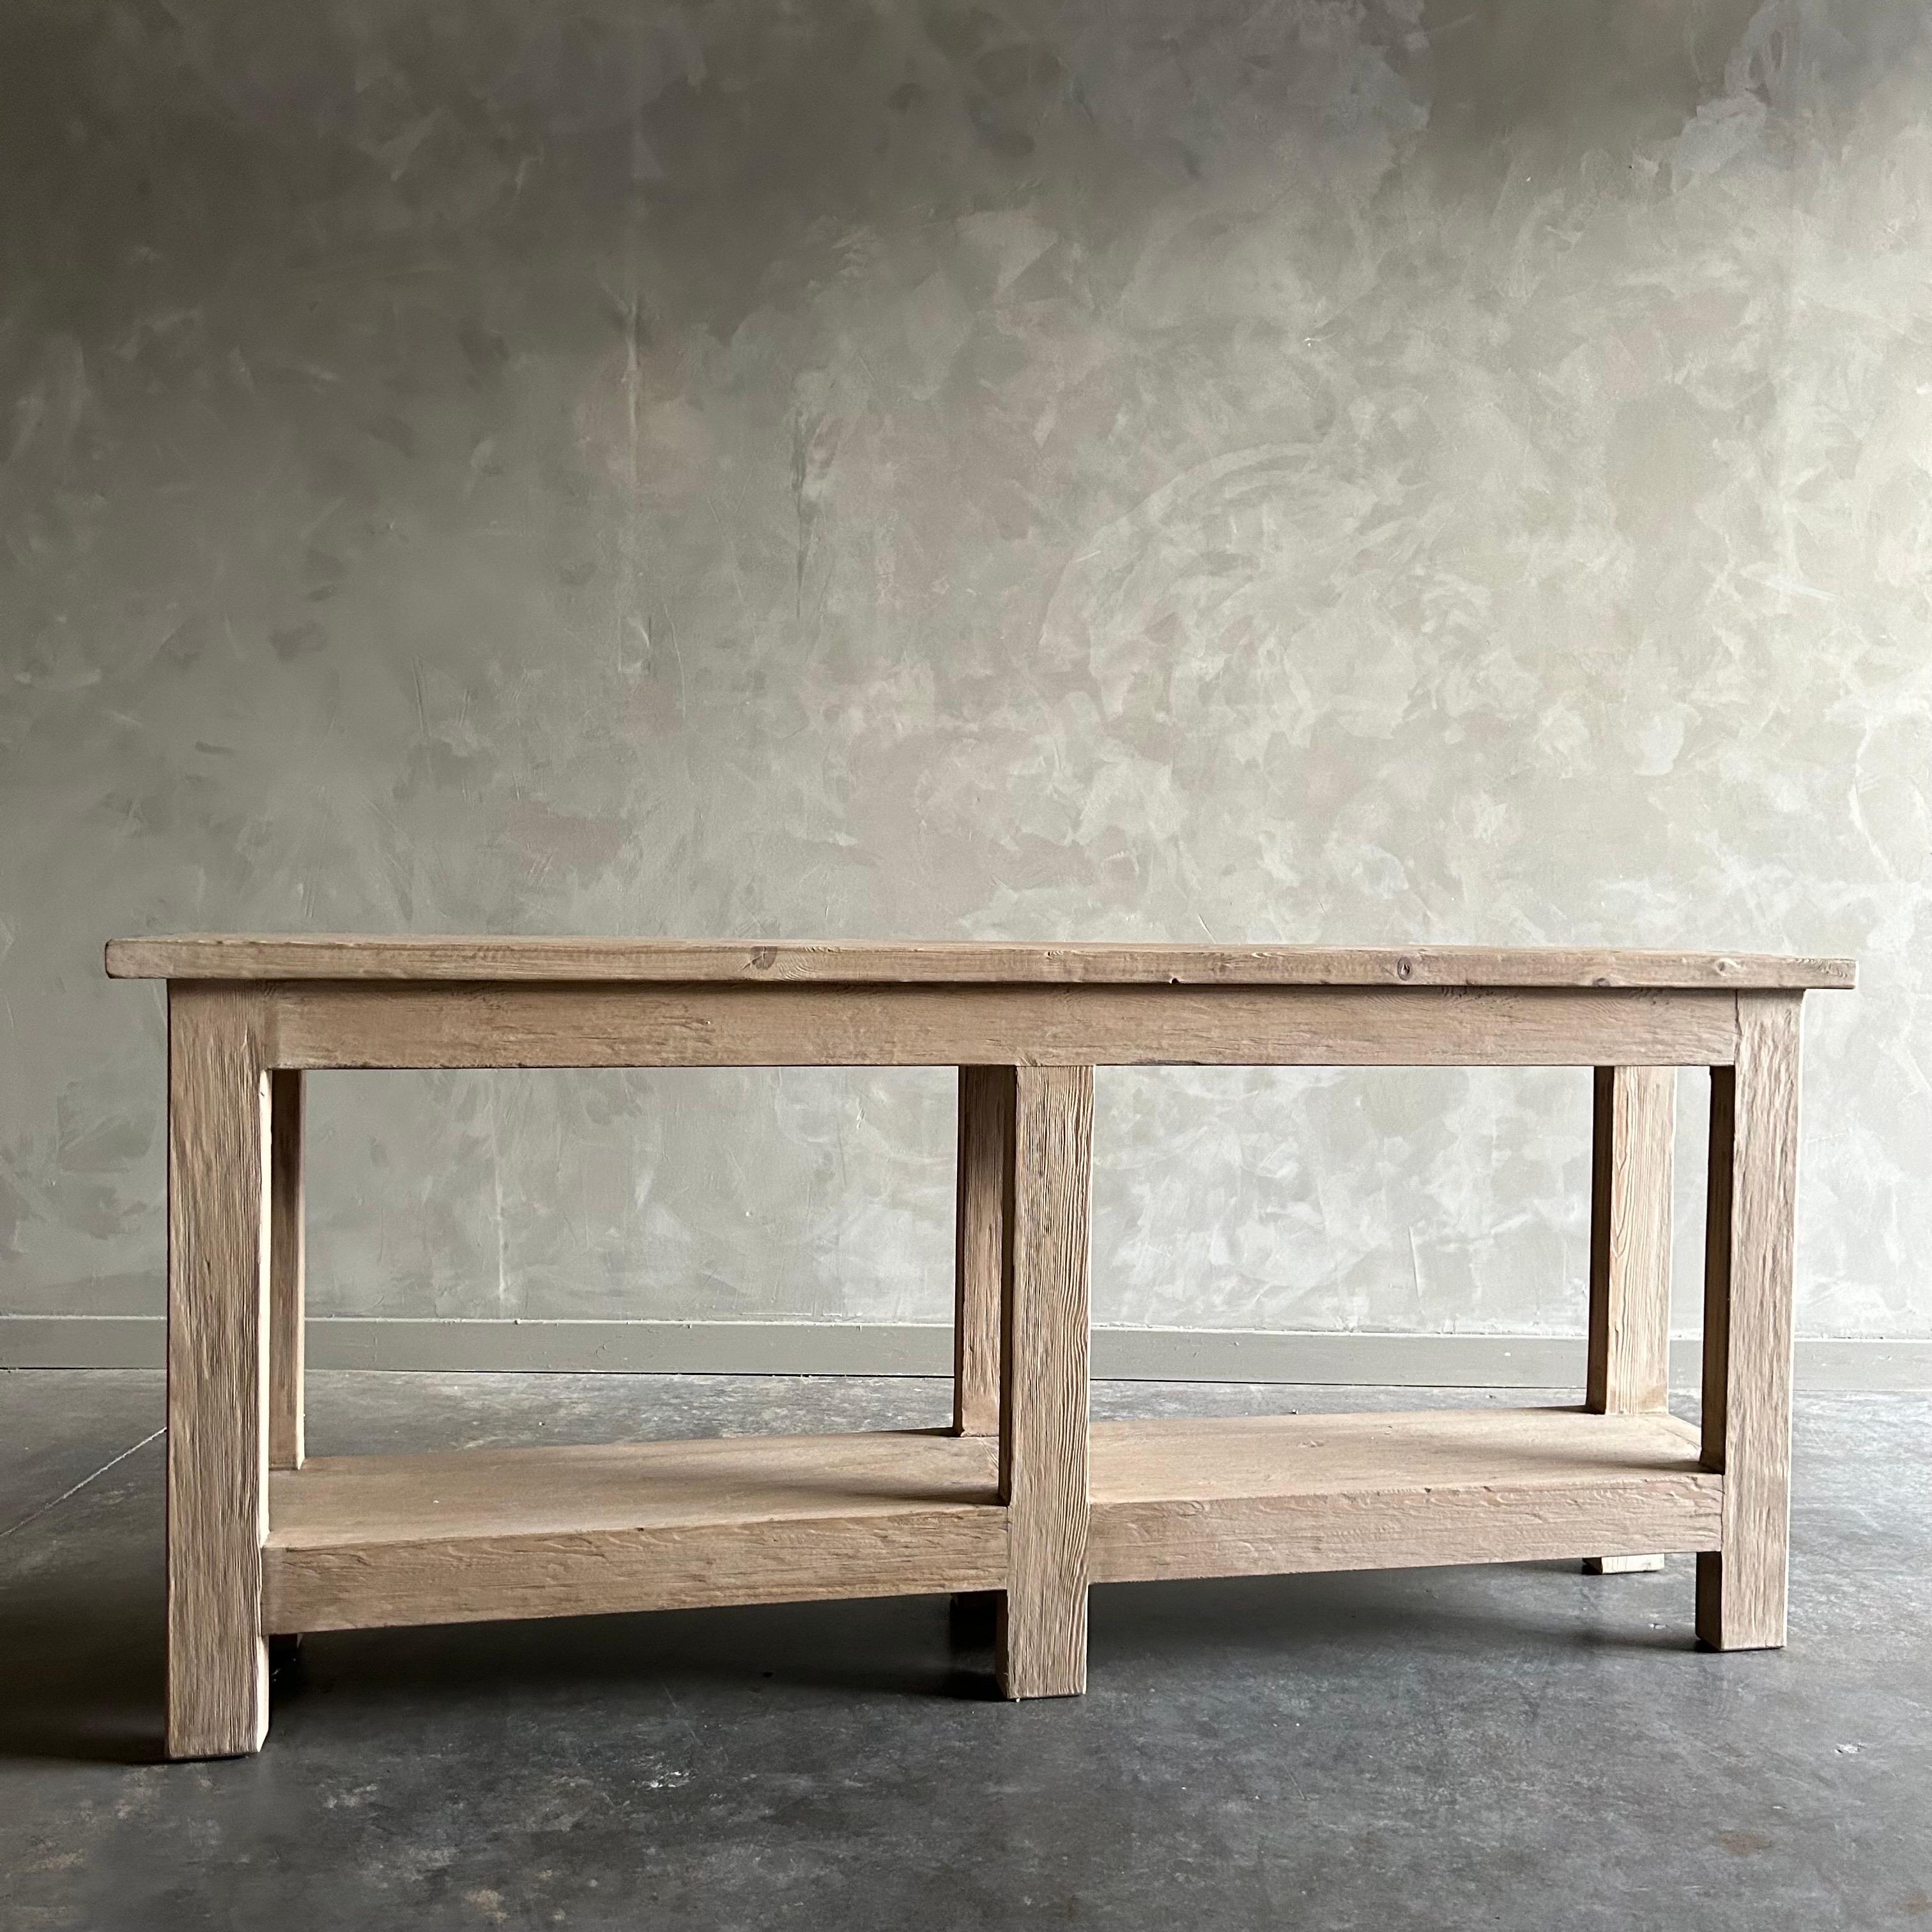 MORI CONSOLE NATURAL FINISH
Natural reclaimed elm wood console that is beautifully crafted and serves as the perfect storage solution for any space. Since this is made from vintage reclaimed materials, there may be some imperfections in the piece or